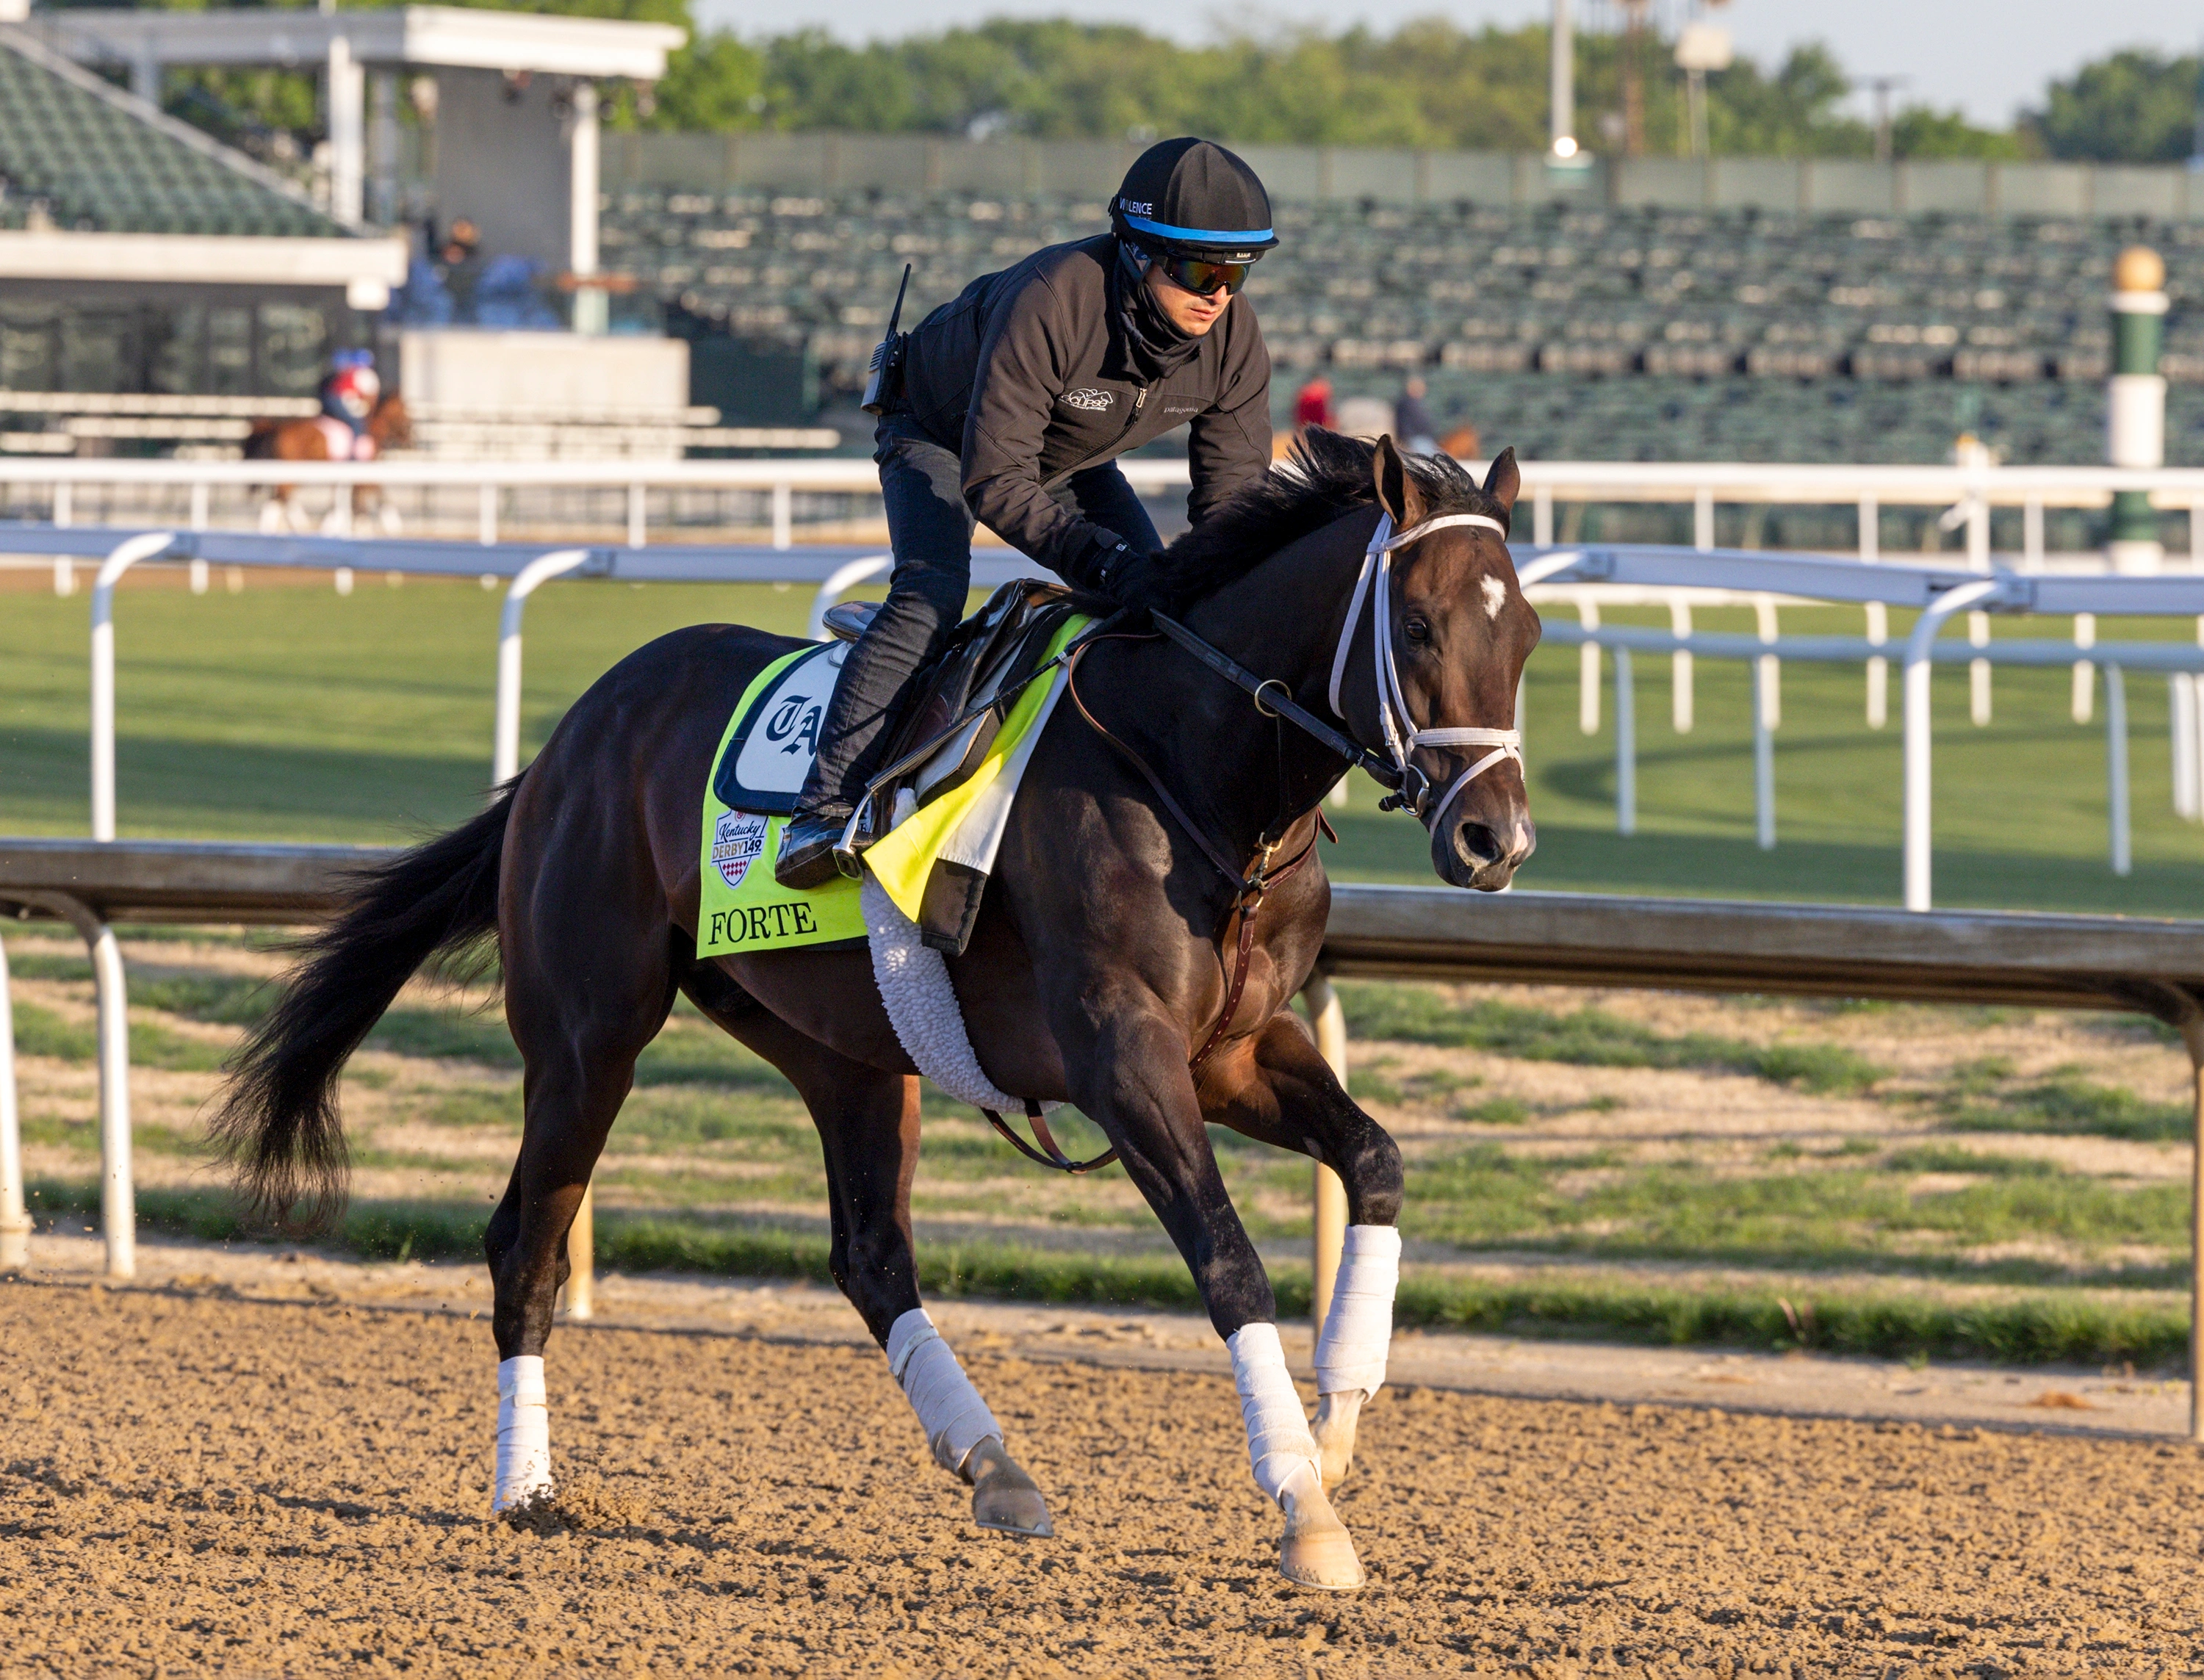 Todd Pletcher says 'everything on course' for Kentucky Derby favorite Forte after 'bobble'